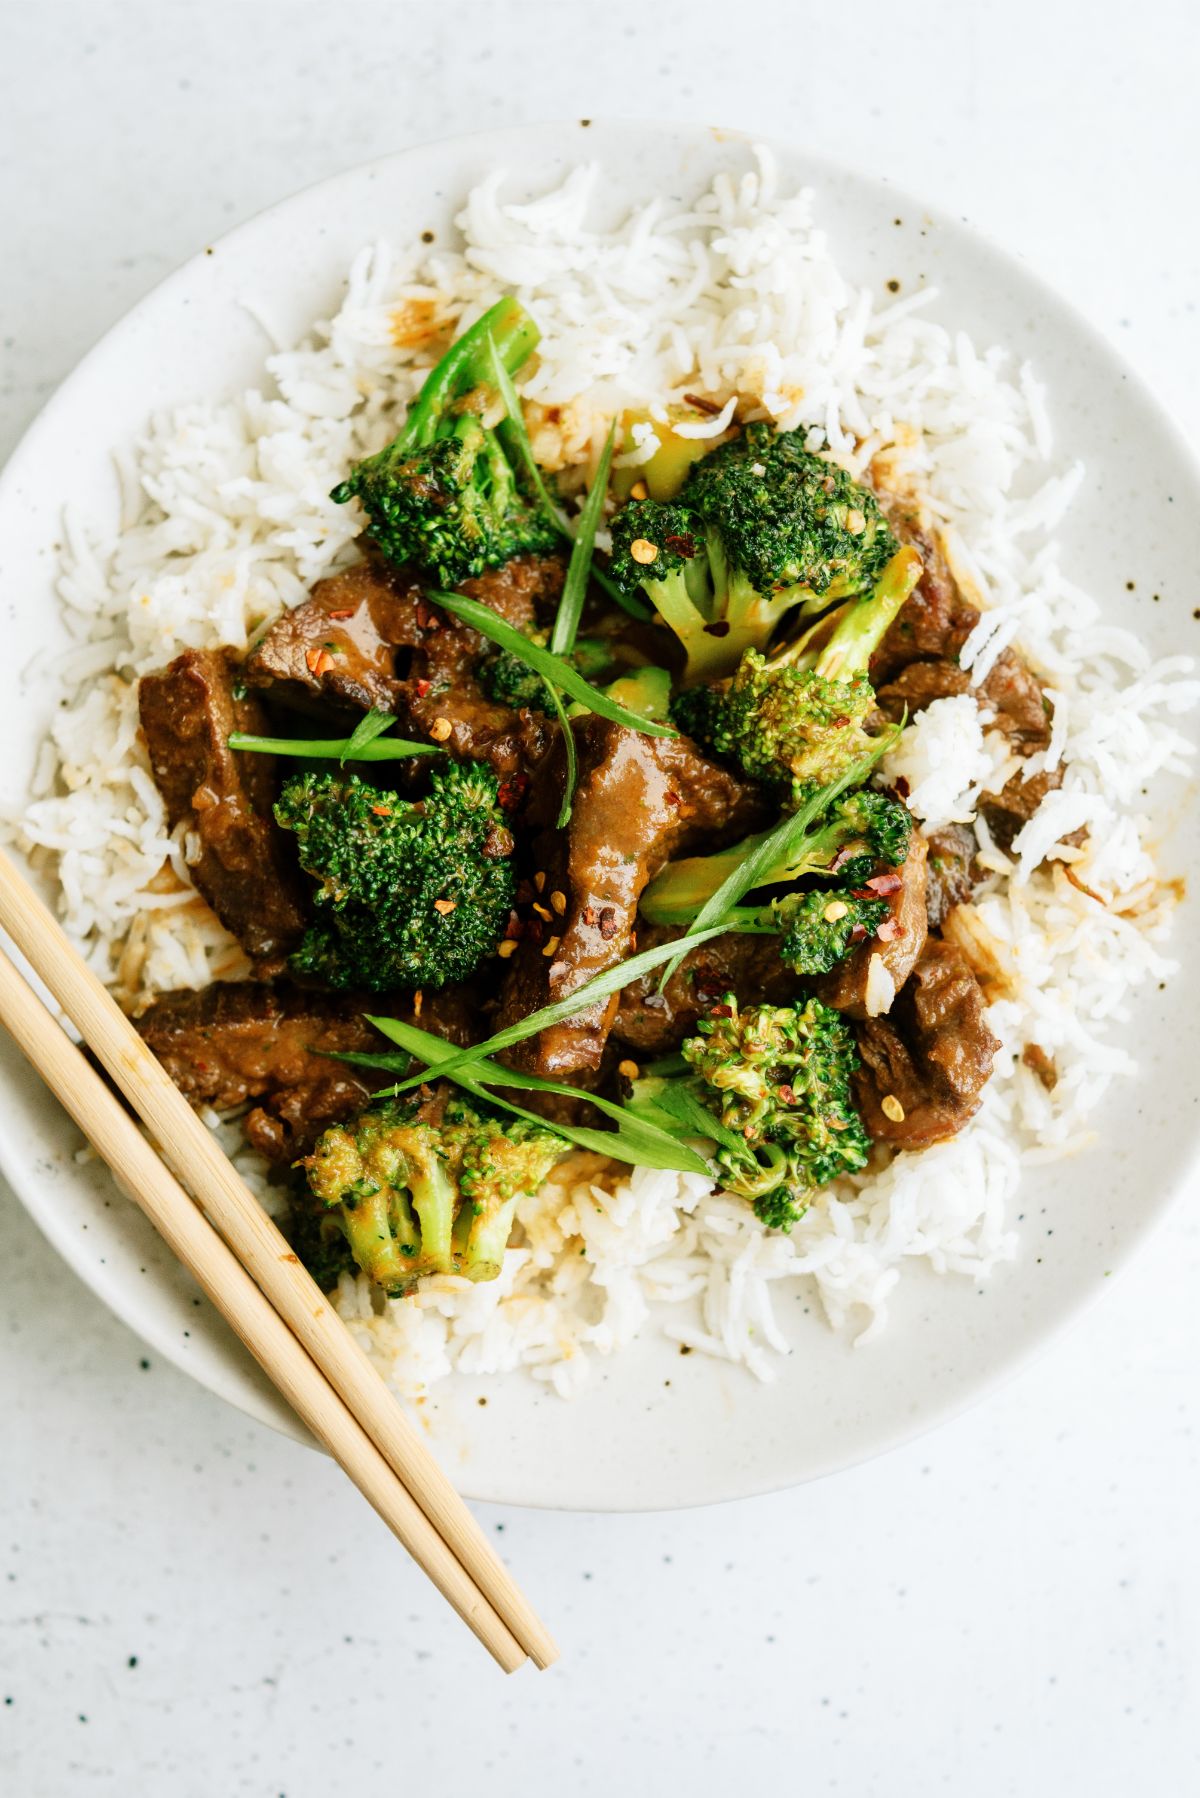 Beef and Broccoli served over rice with chop sticks